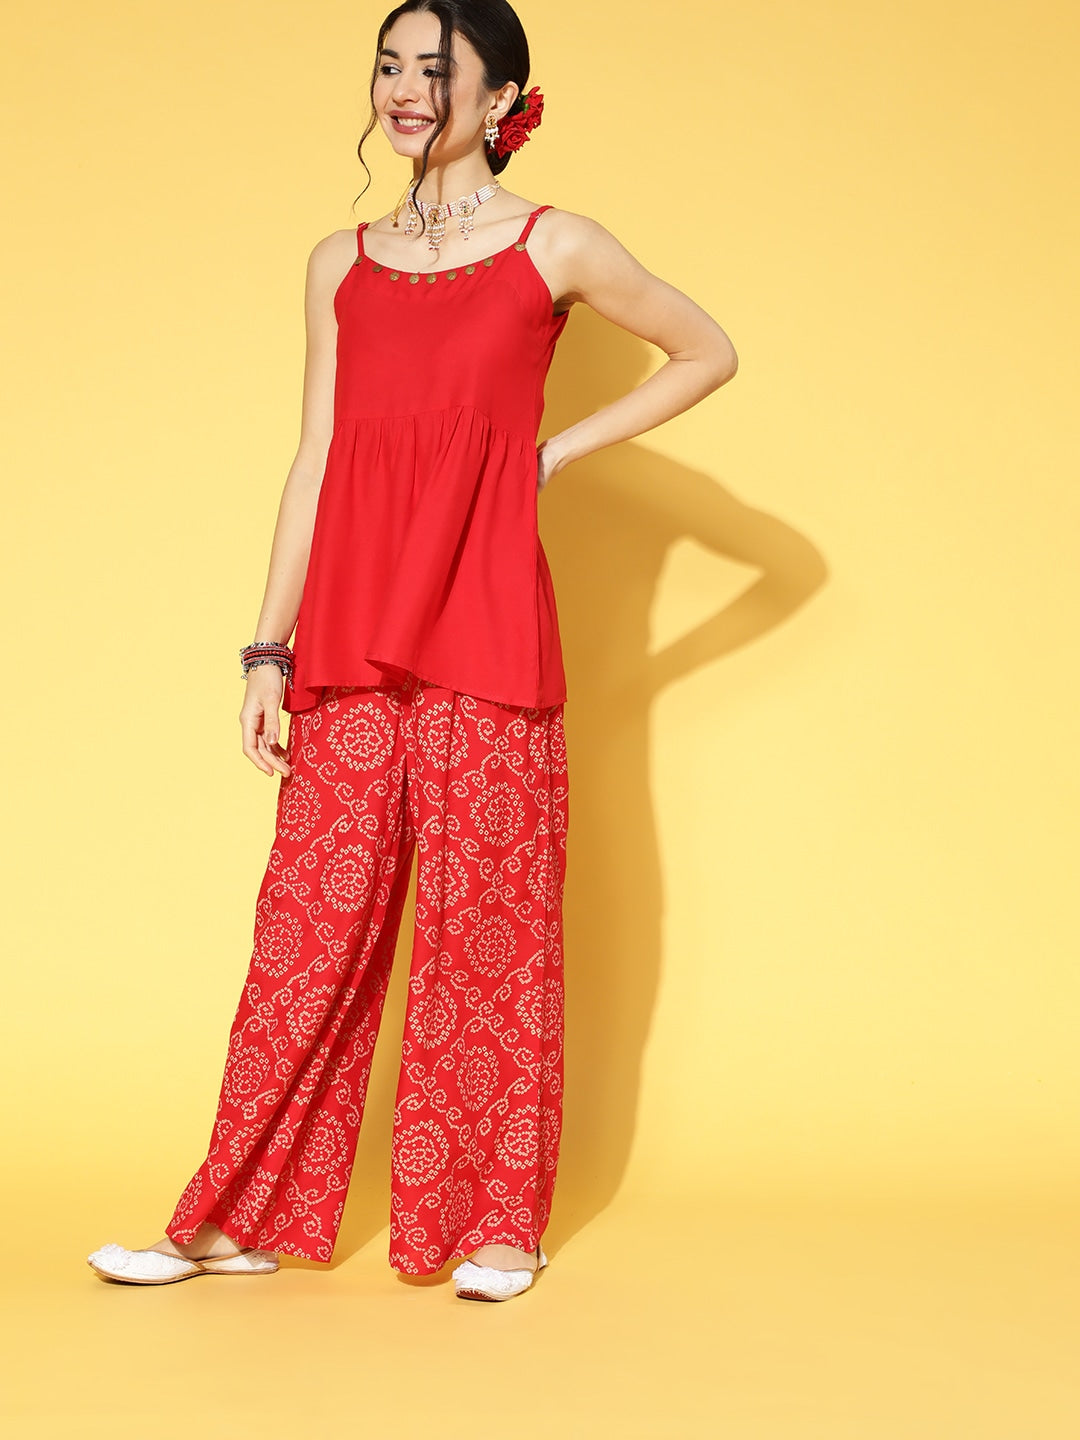 Women shrug with printed short top and palazzo